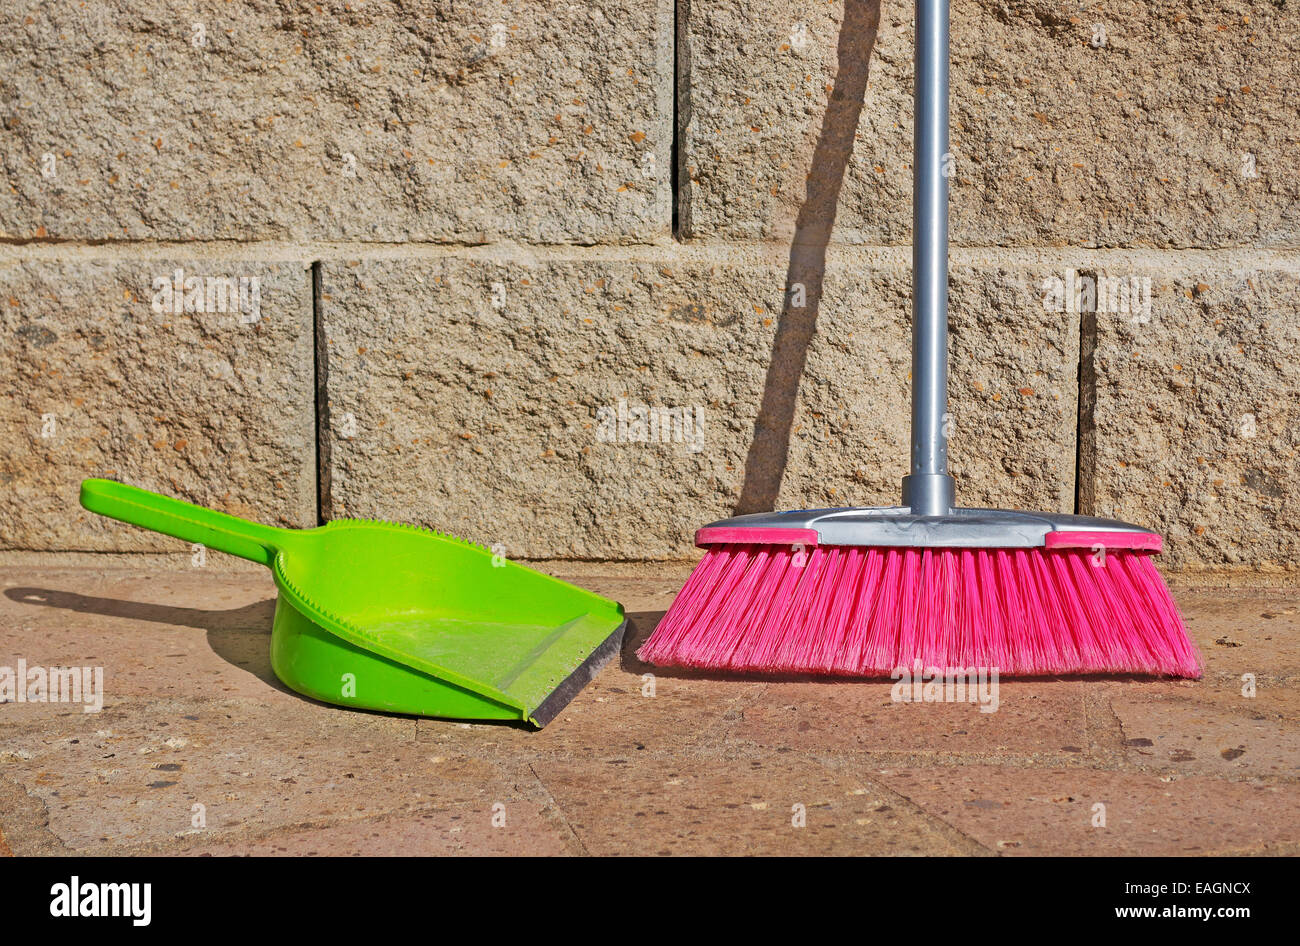 green shovel and pink broom on the ground Stock Photo